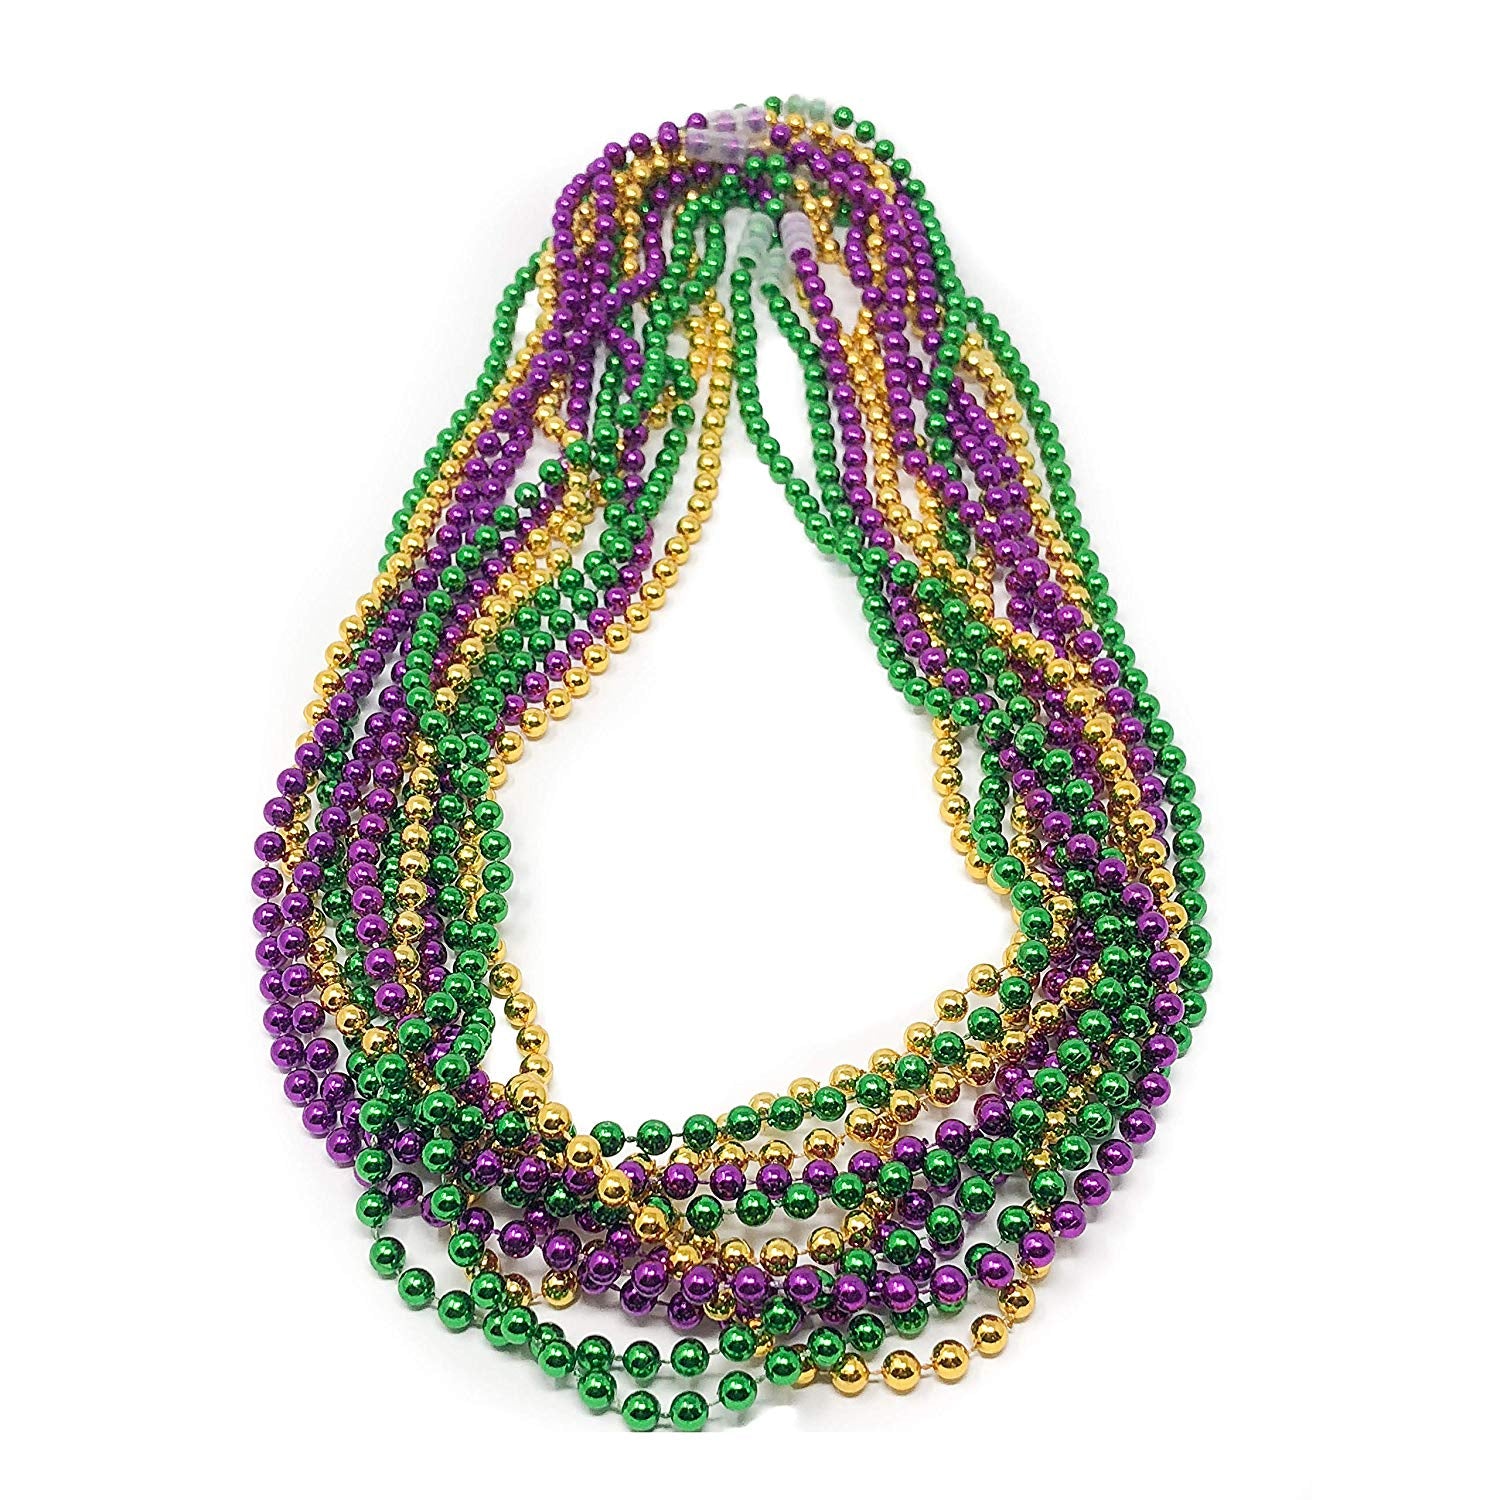 Amazon.com: GiftExpress 72 pack 6 Assorted Color Mardi Gras Beads Bulk,  Mardi Gras Beads Necklaces Assortment, Throw Beads in Bulk, Gasparilla beads  : Toys & Games